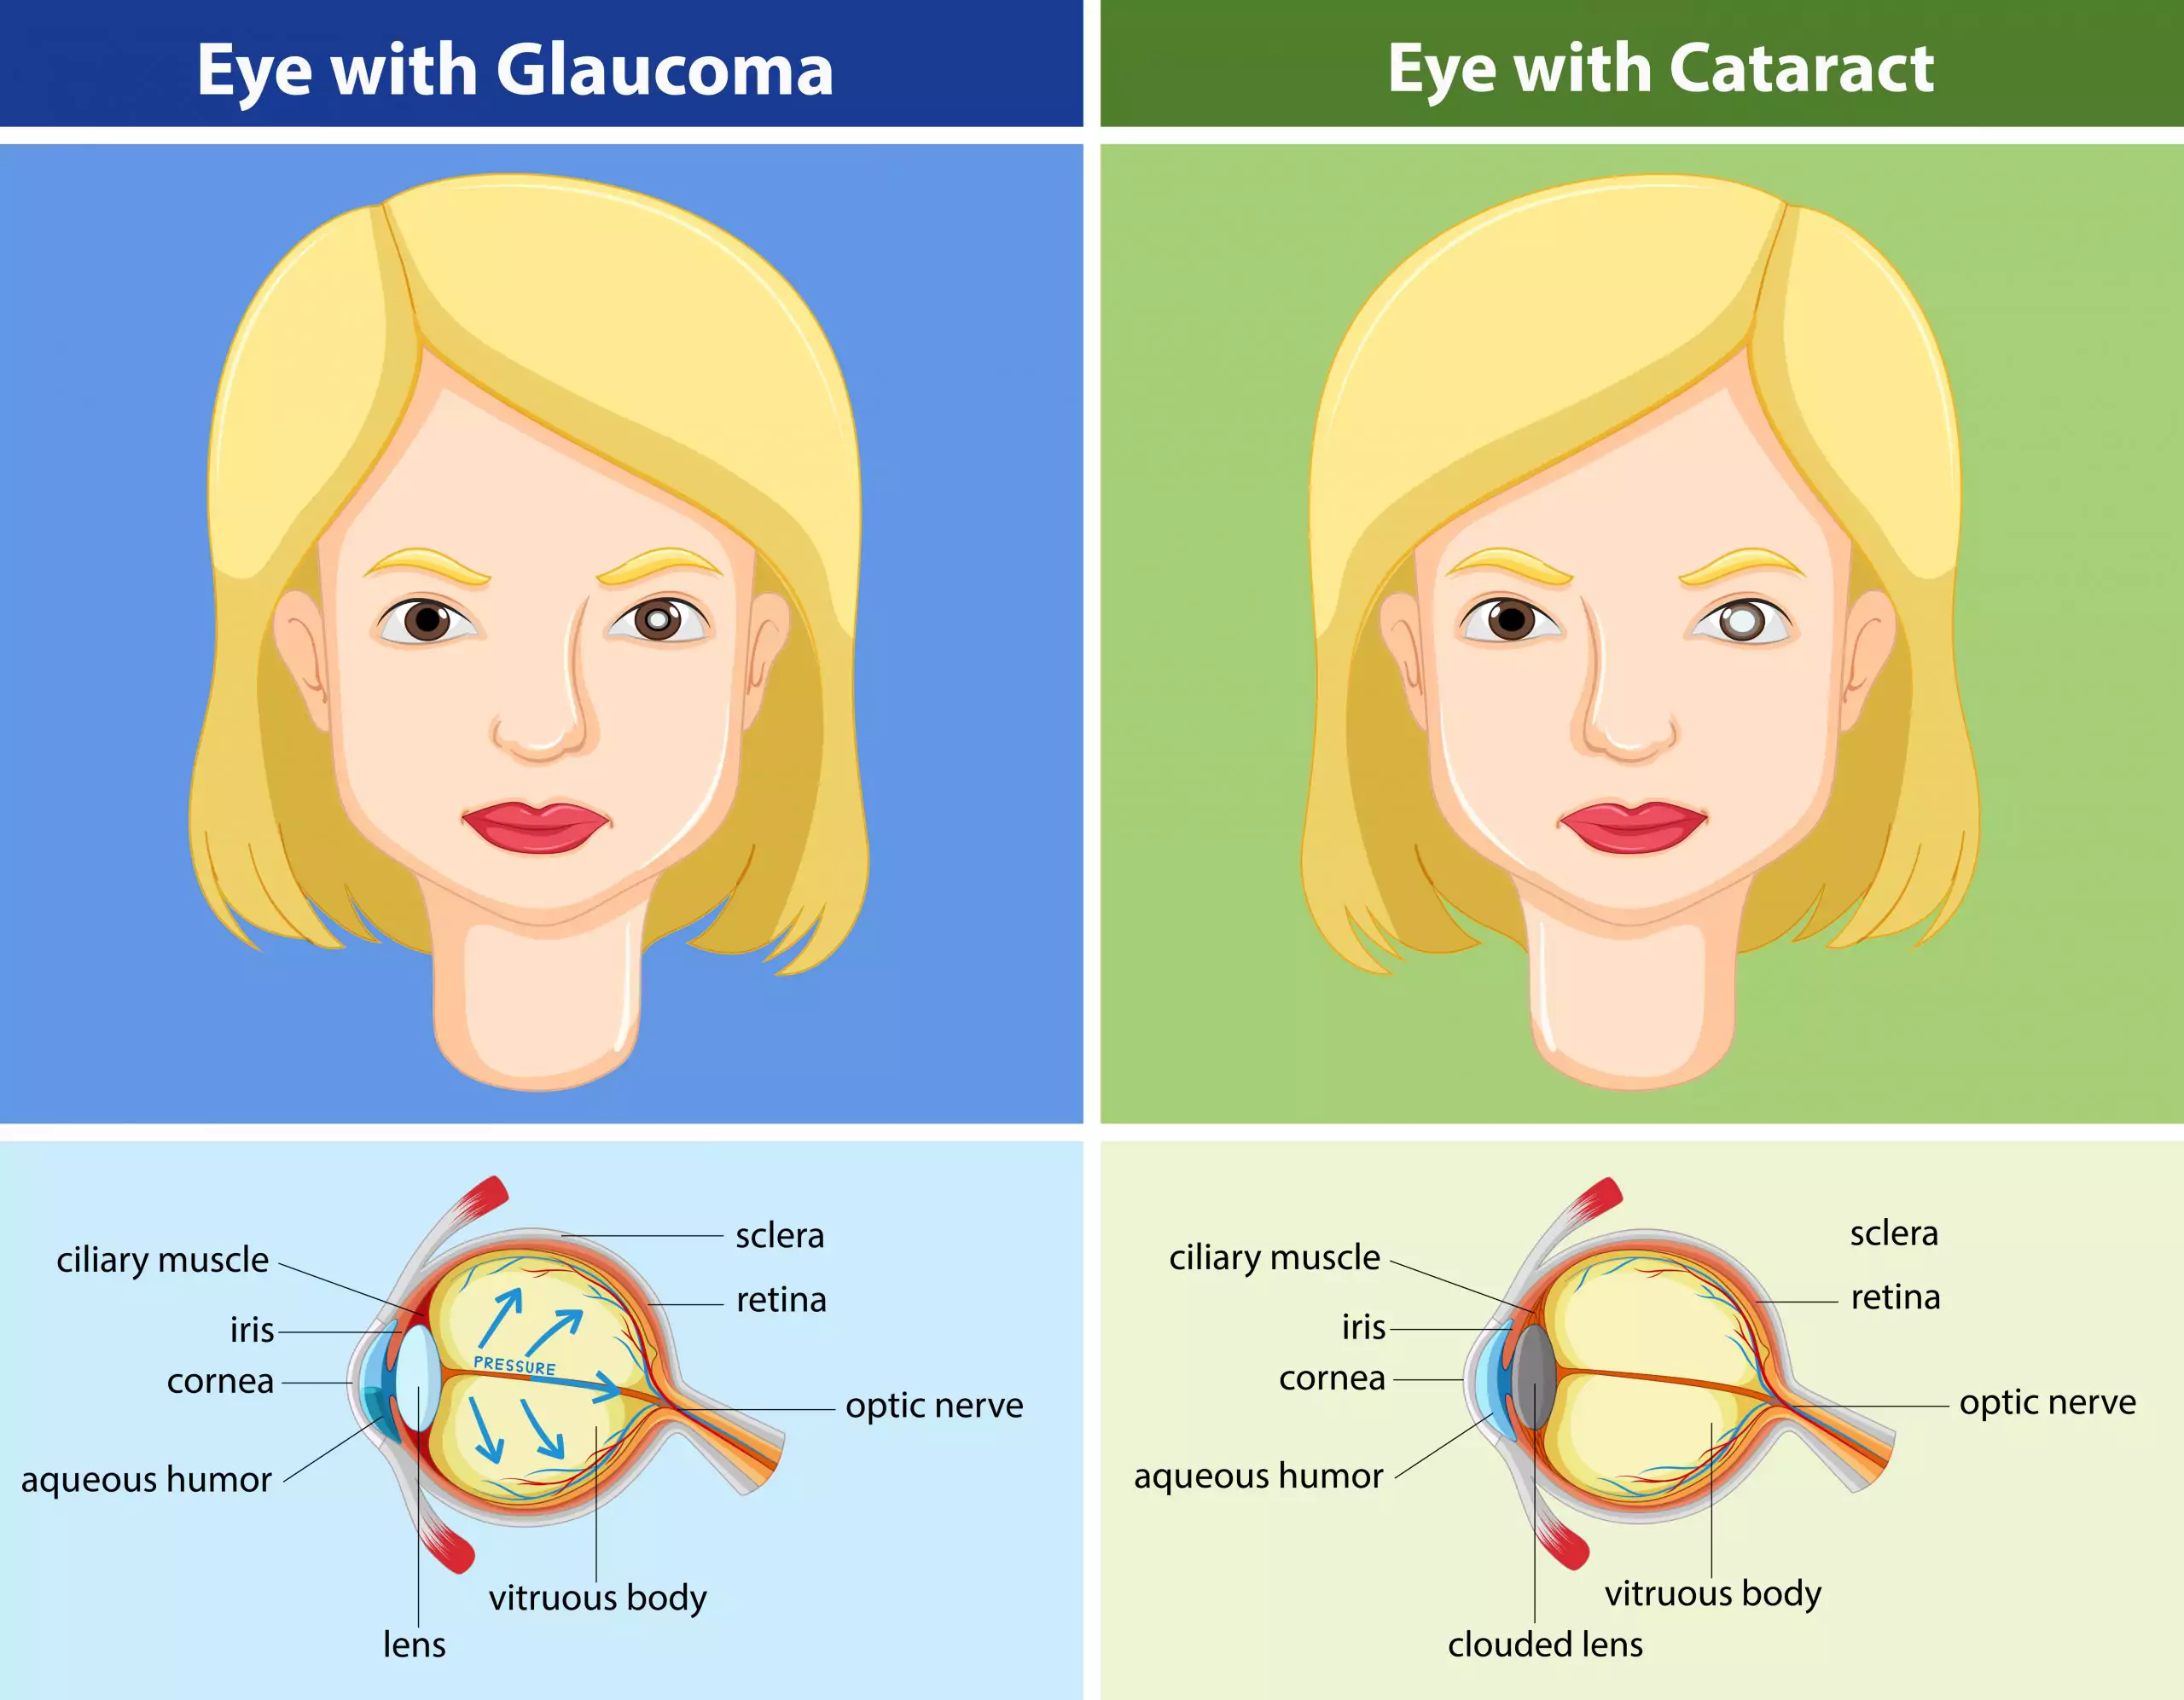 animation displaying the difference between glaucoma vs cataracts